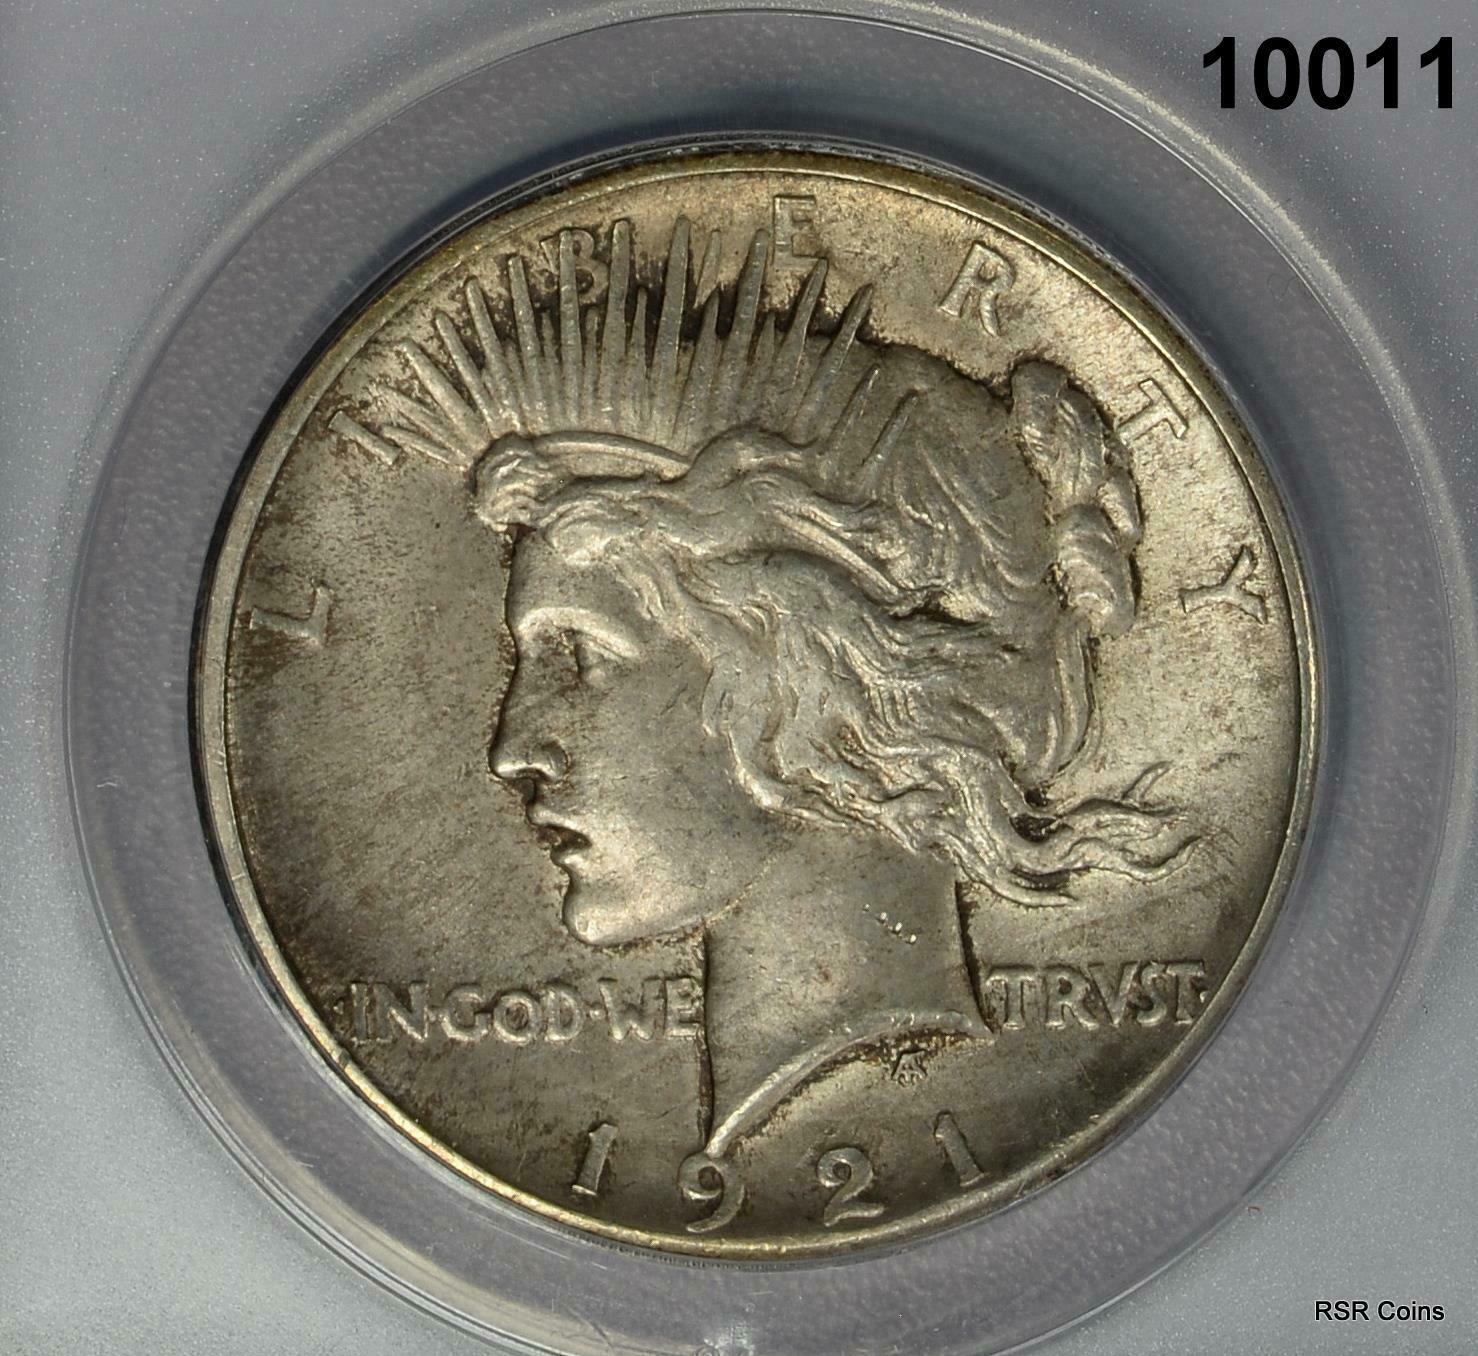 1921 PEACE SILVER DOLLAR HIGH RELIEF  ANACS CERTIFIED AU58 SATIN COIN!  #10011